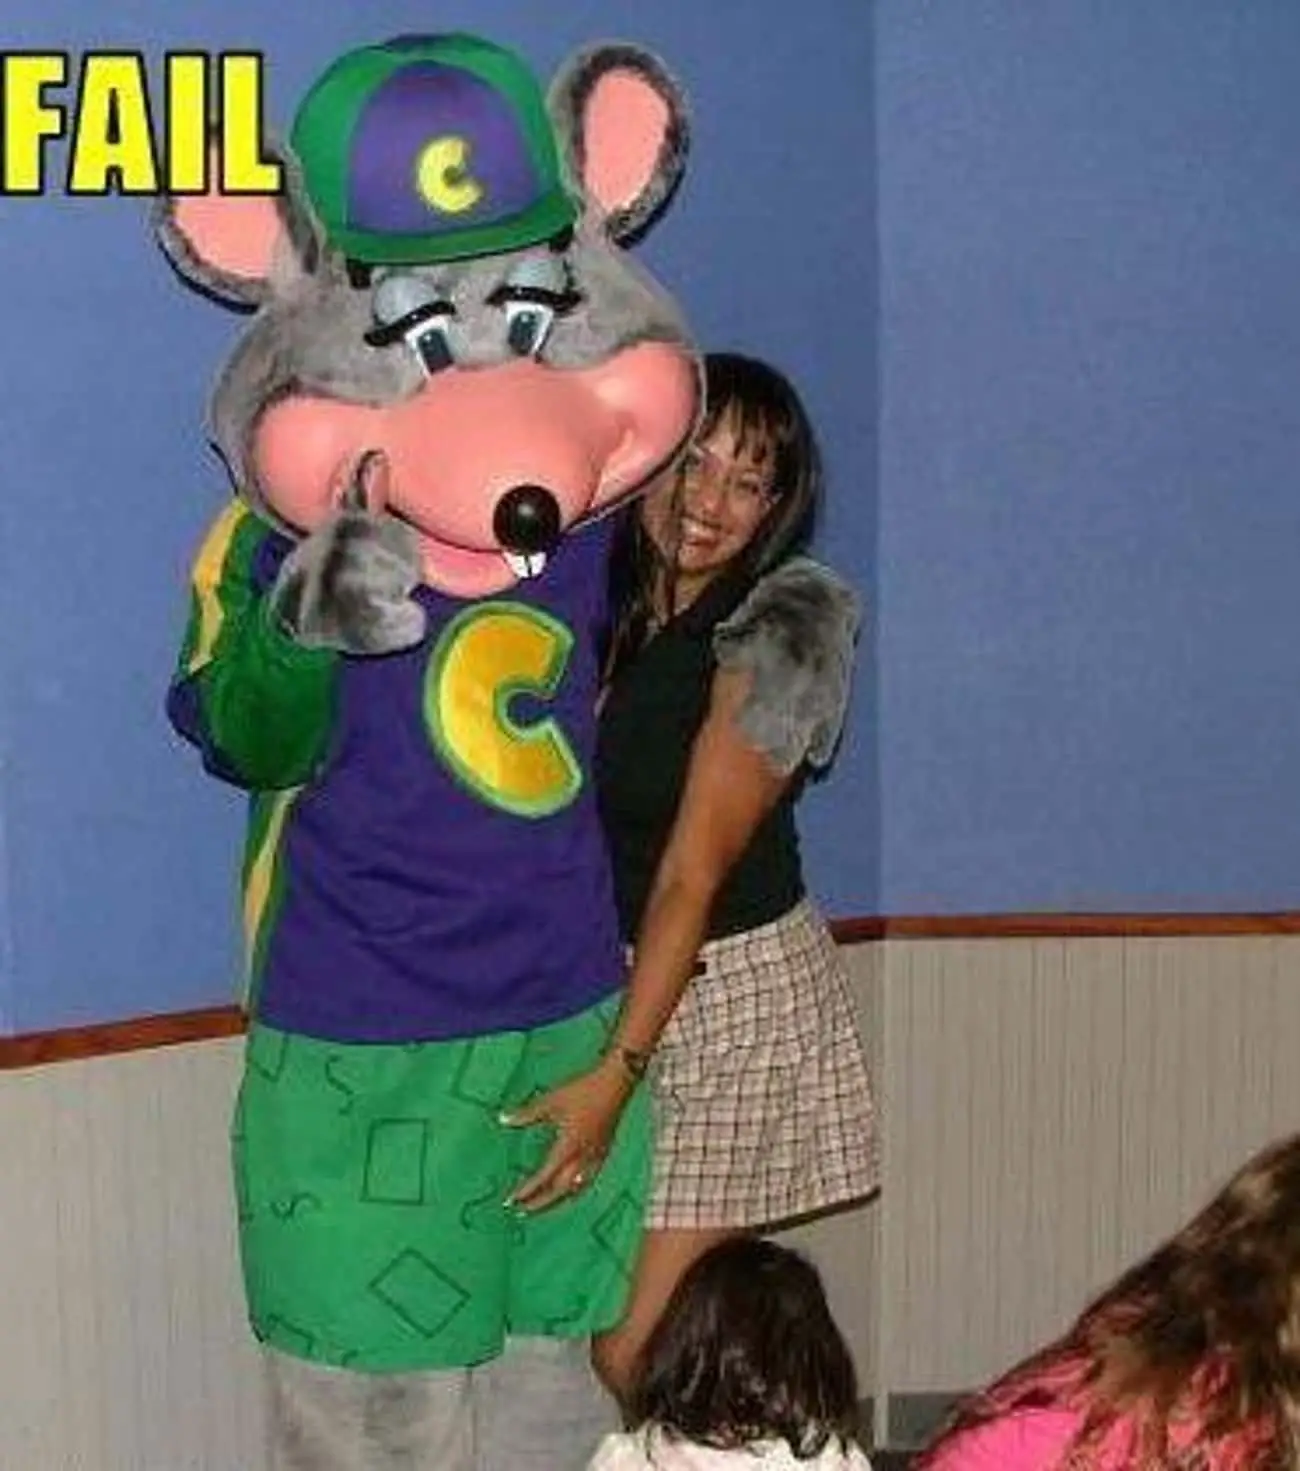 The Creepiest Chuck E. Cheese Photos of All Time